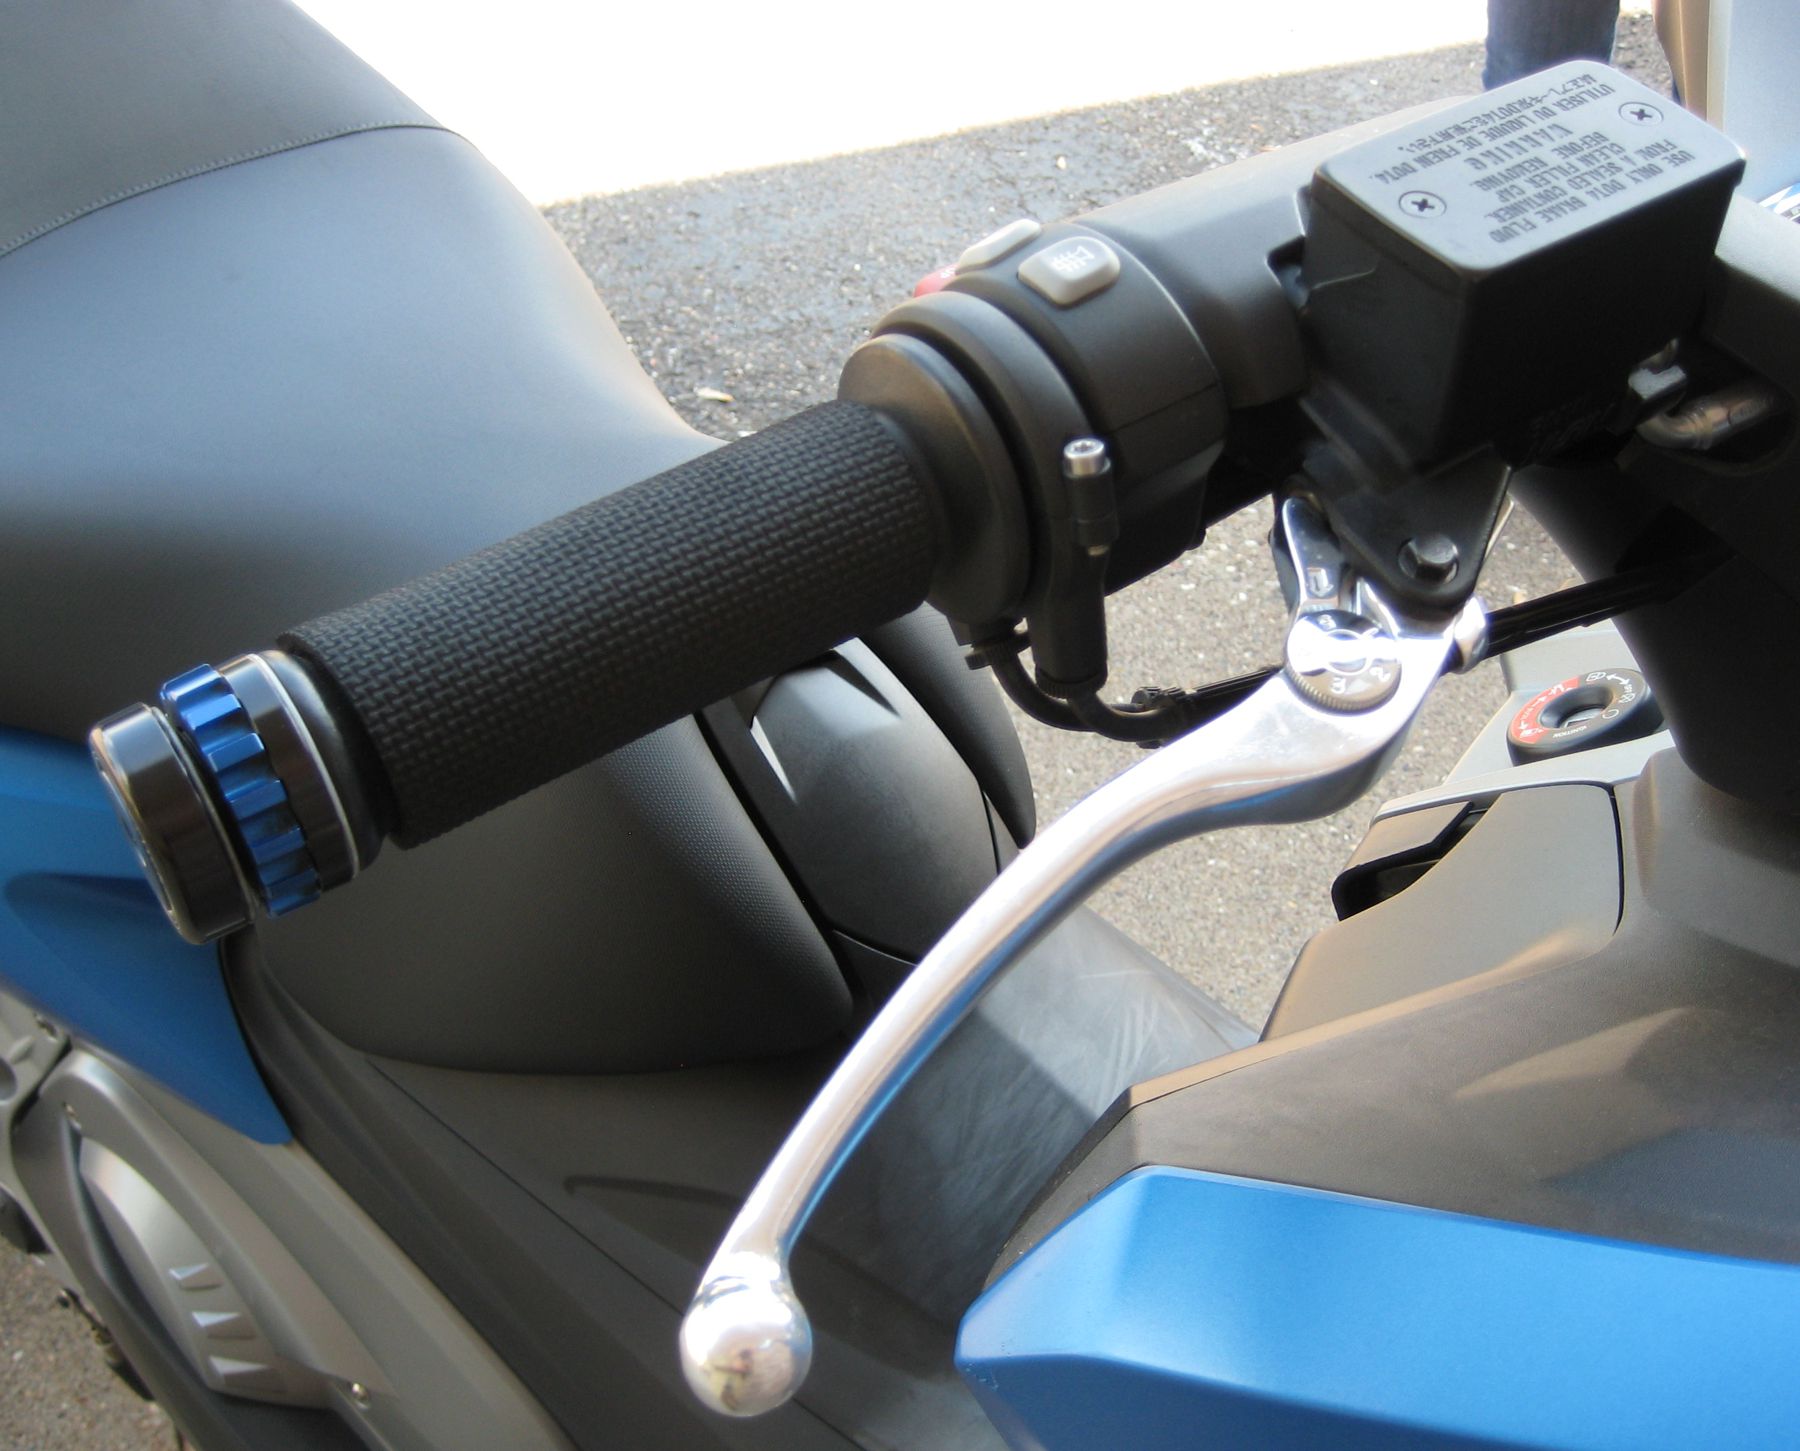 Right grip on the BMW C600 sport